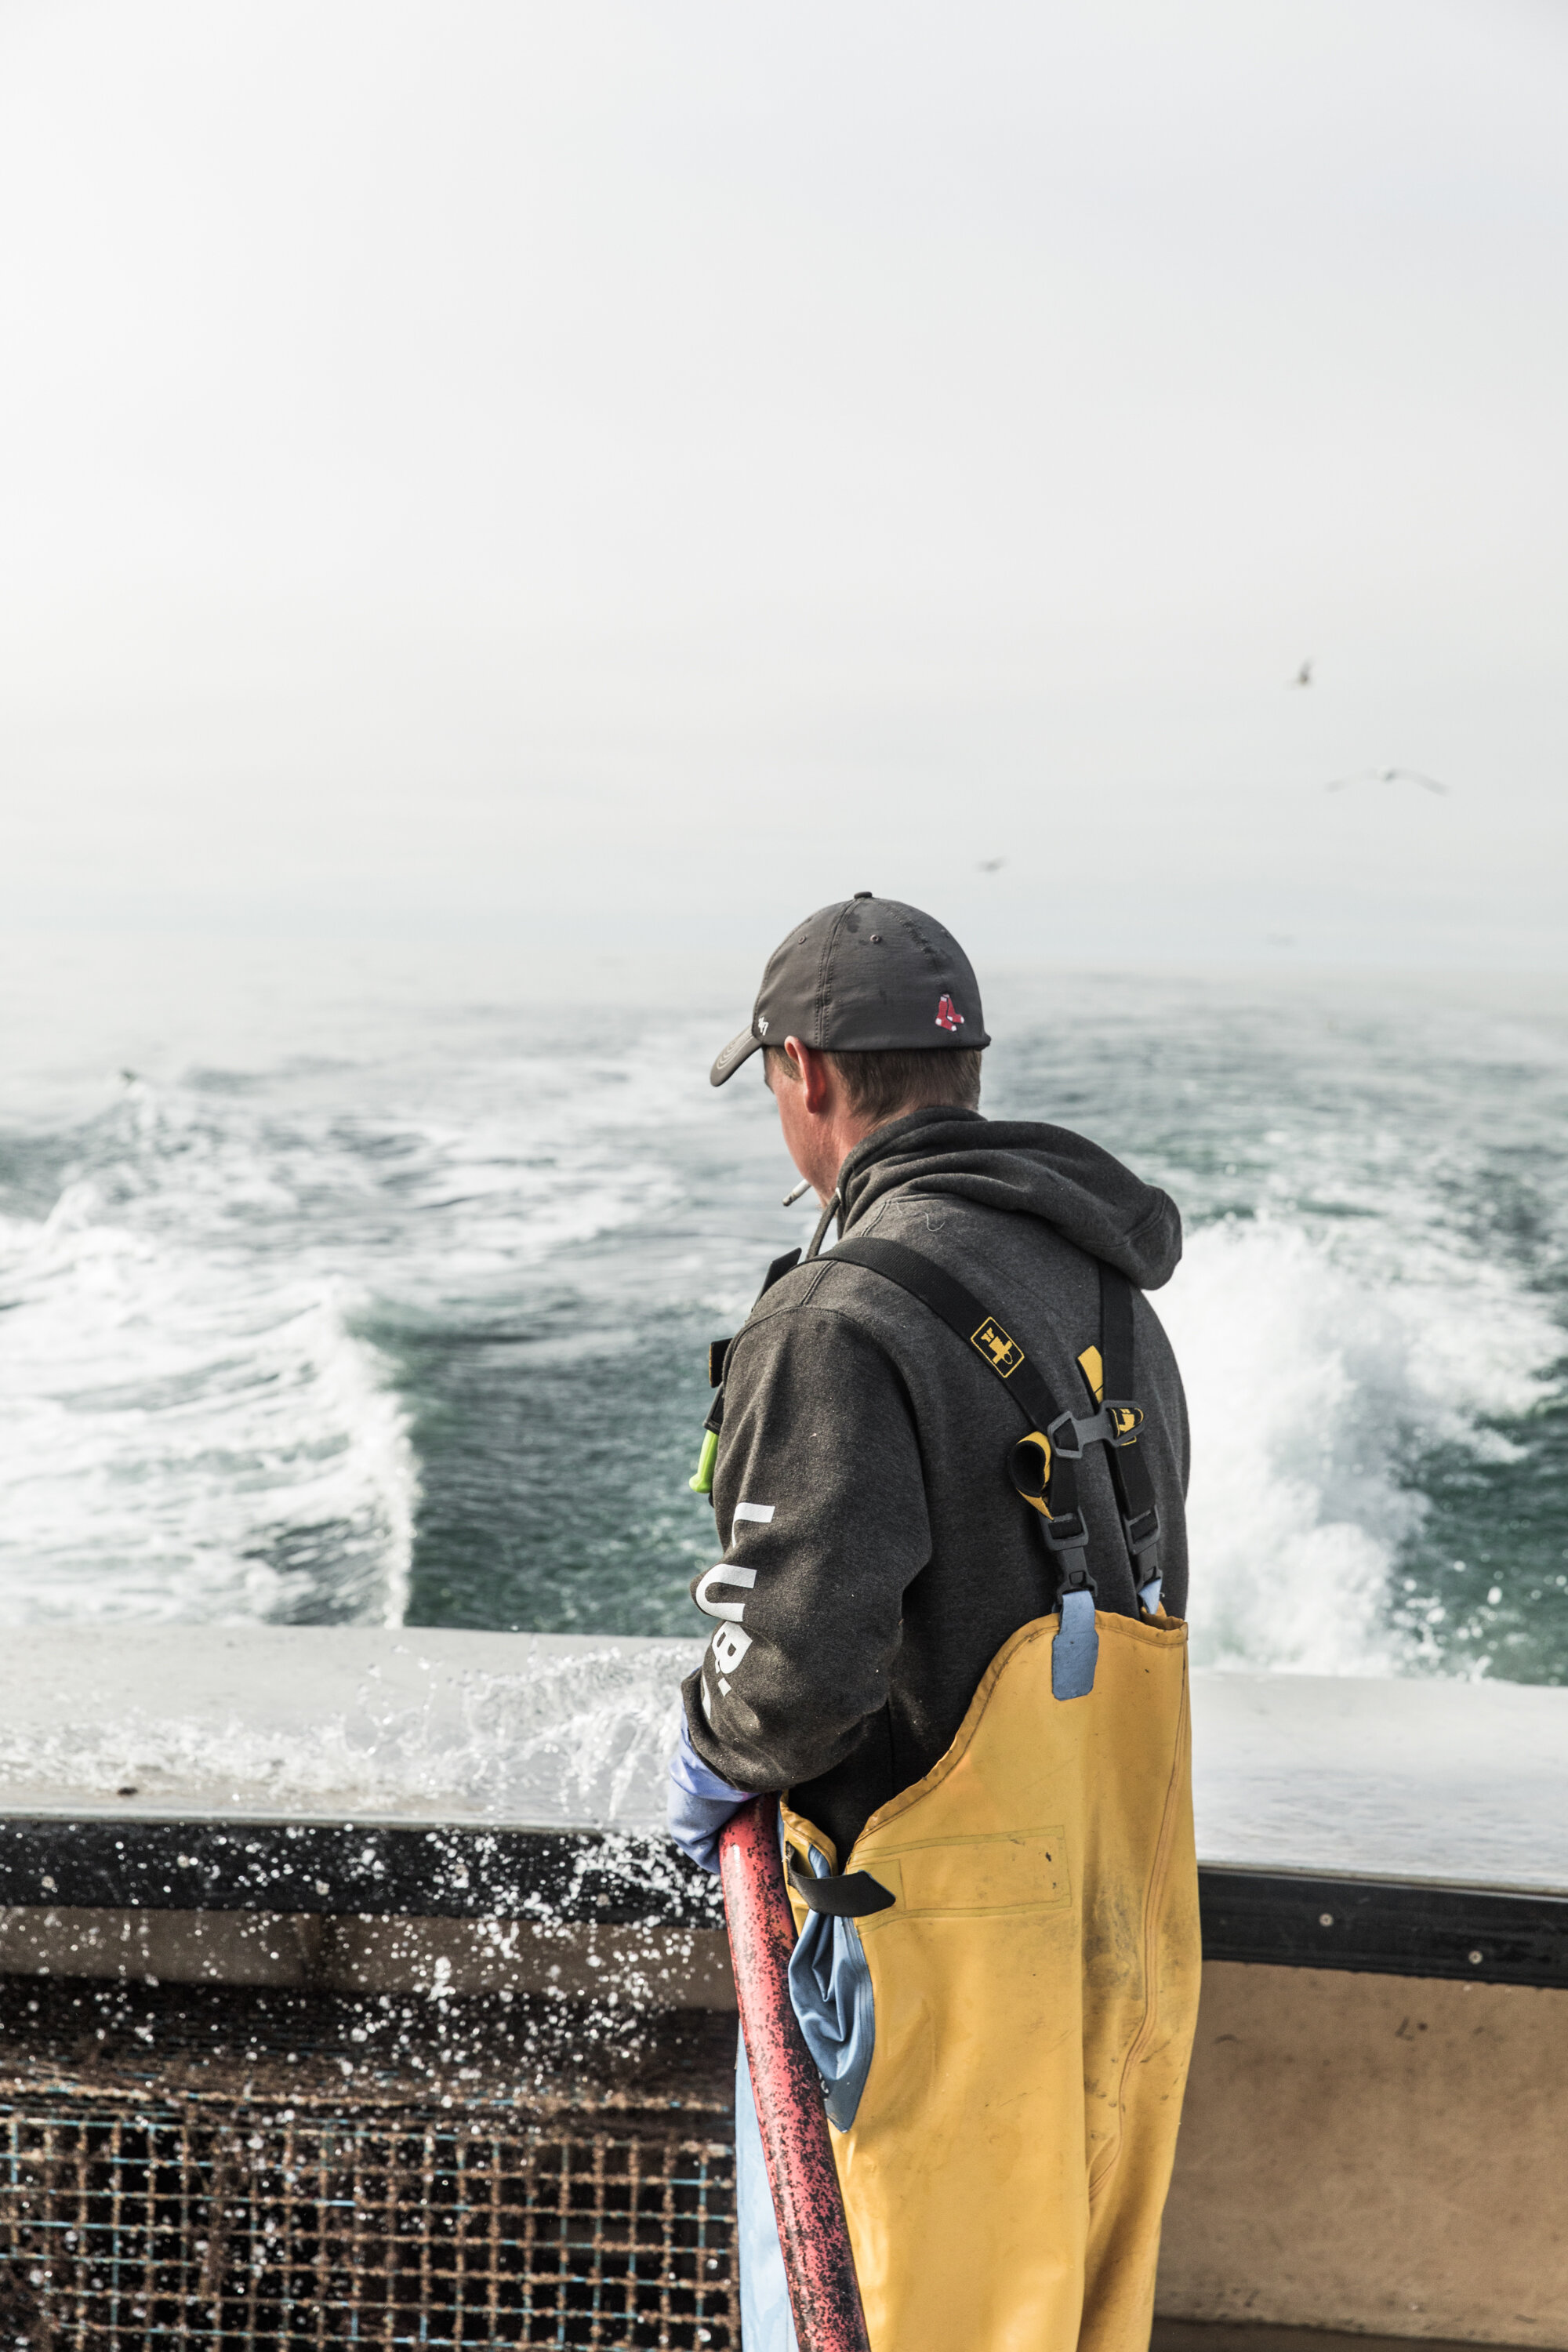   Jake (last name) halibut fishing     “We gotta go catch the slack. Hauling halibut you have to haul it on a slack so there isn't so much tide fightin' the fish. It’s hard bottom in here, that’s why I fish it. It’s a weird fishery, trying to figure 